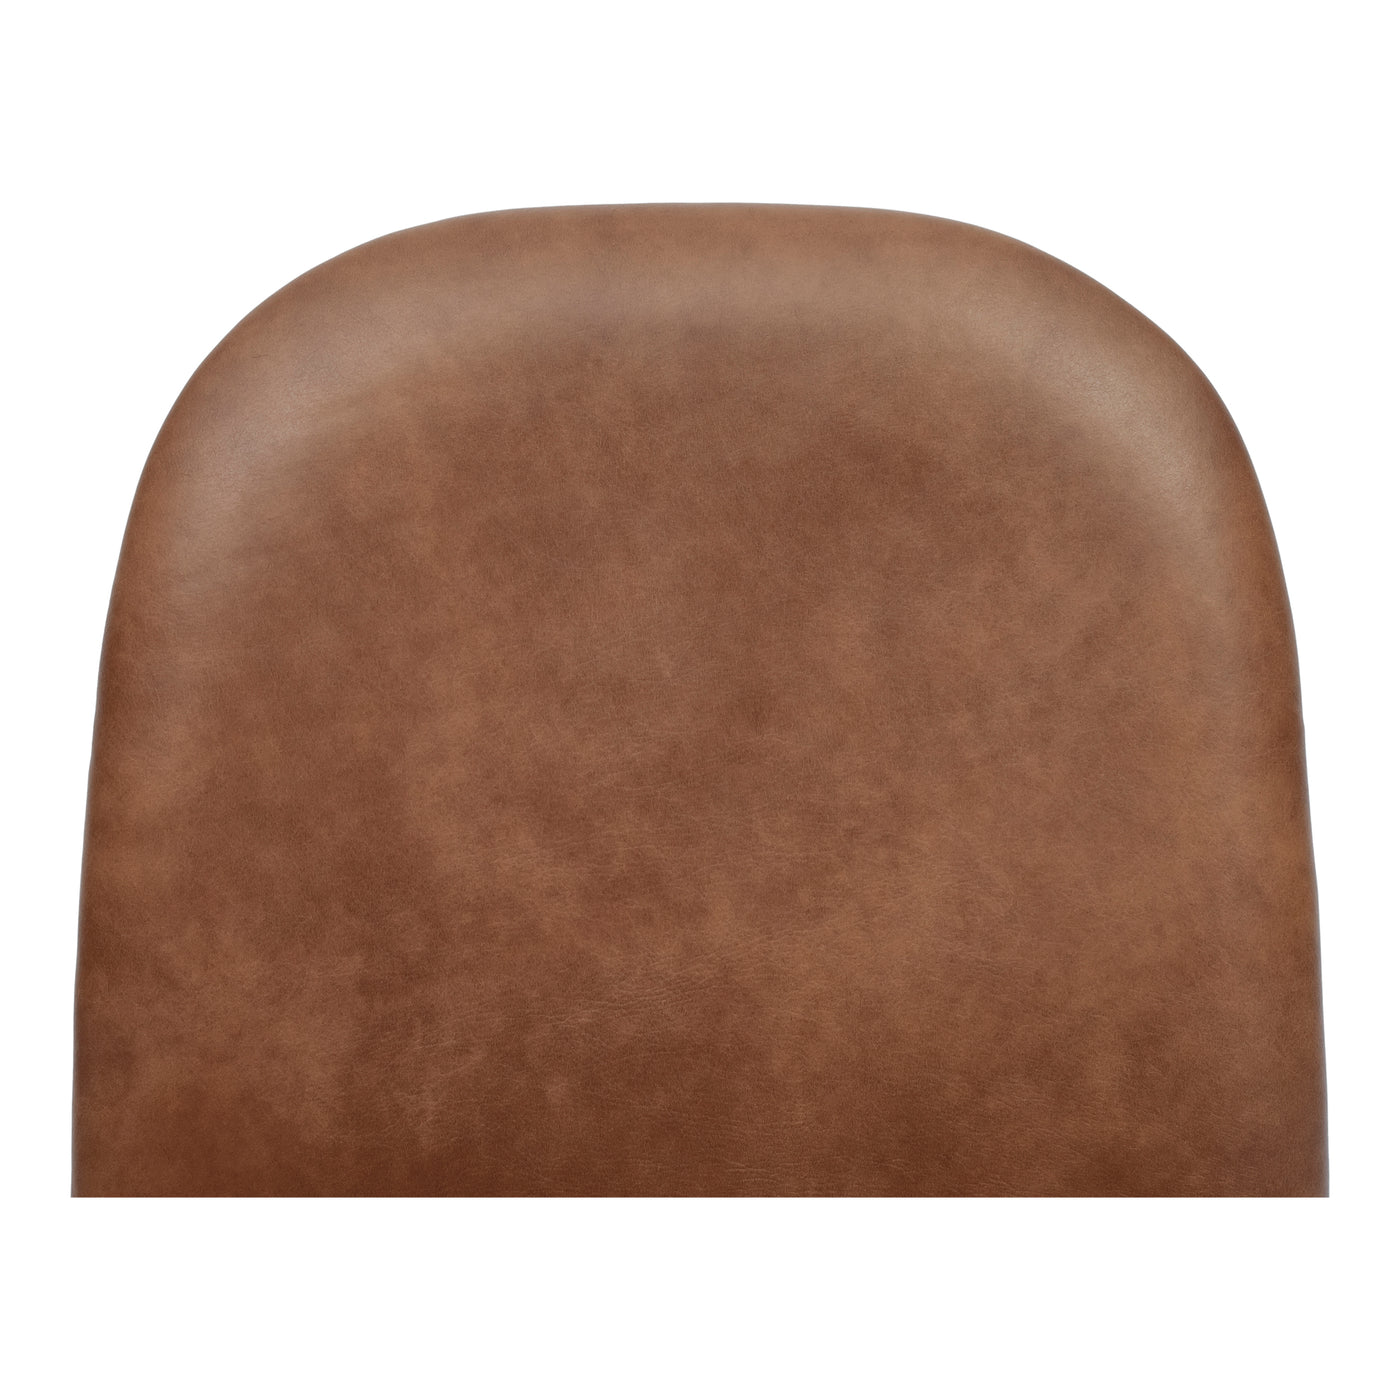 The Napoli is a warm addition to your dining room table or work desk. Upholstered in a top grain leather, it feels as smoo...